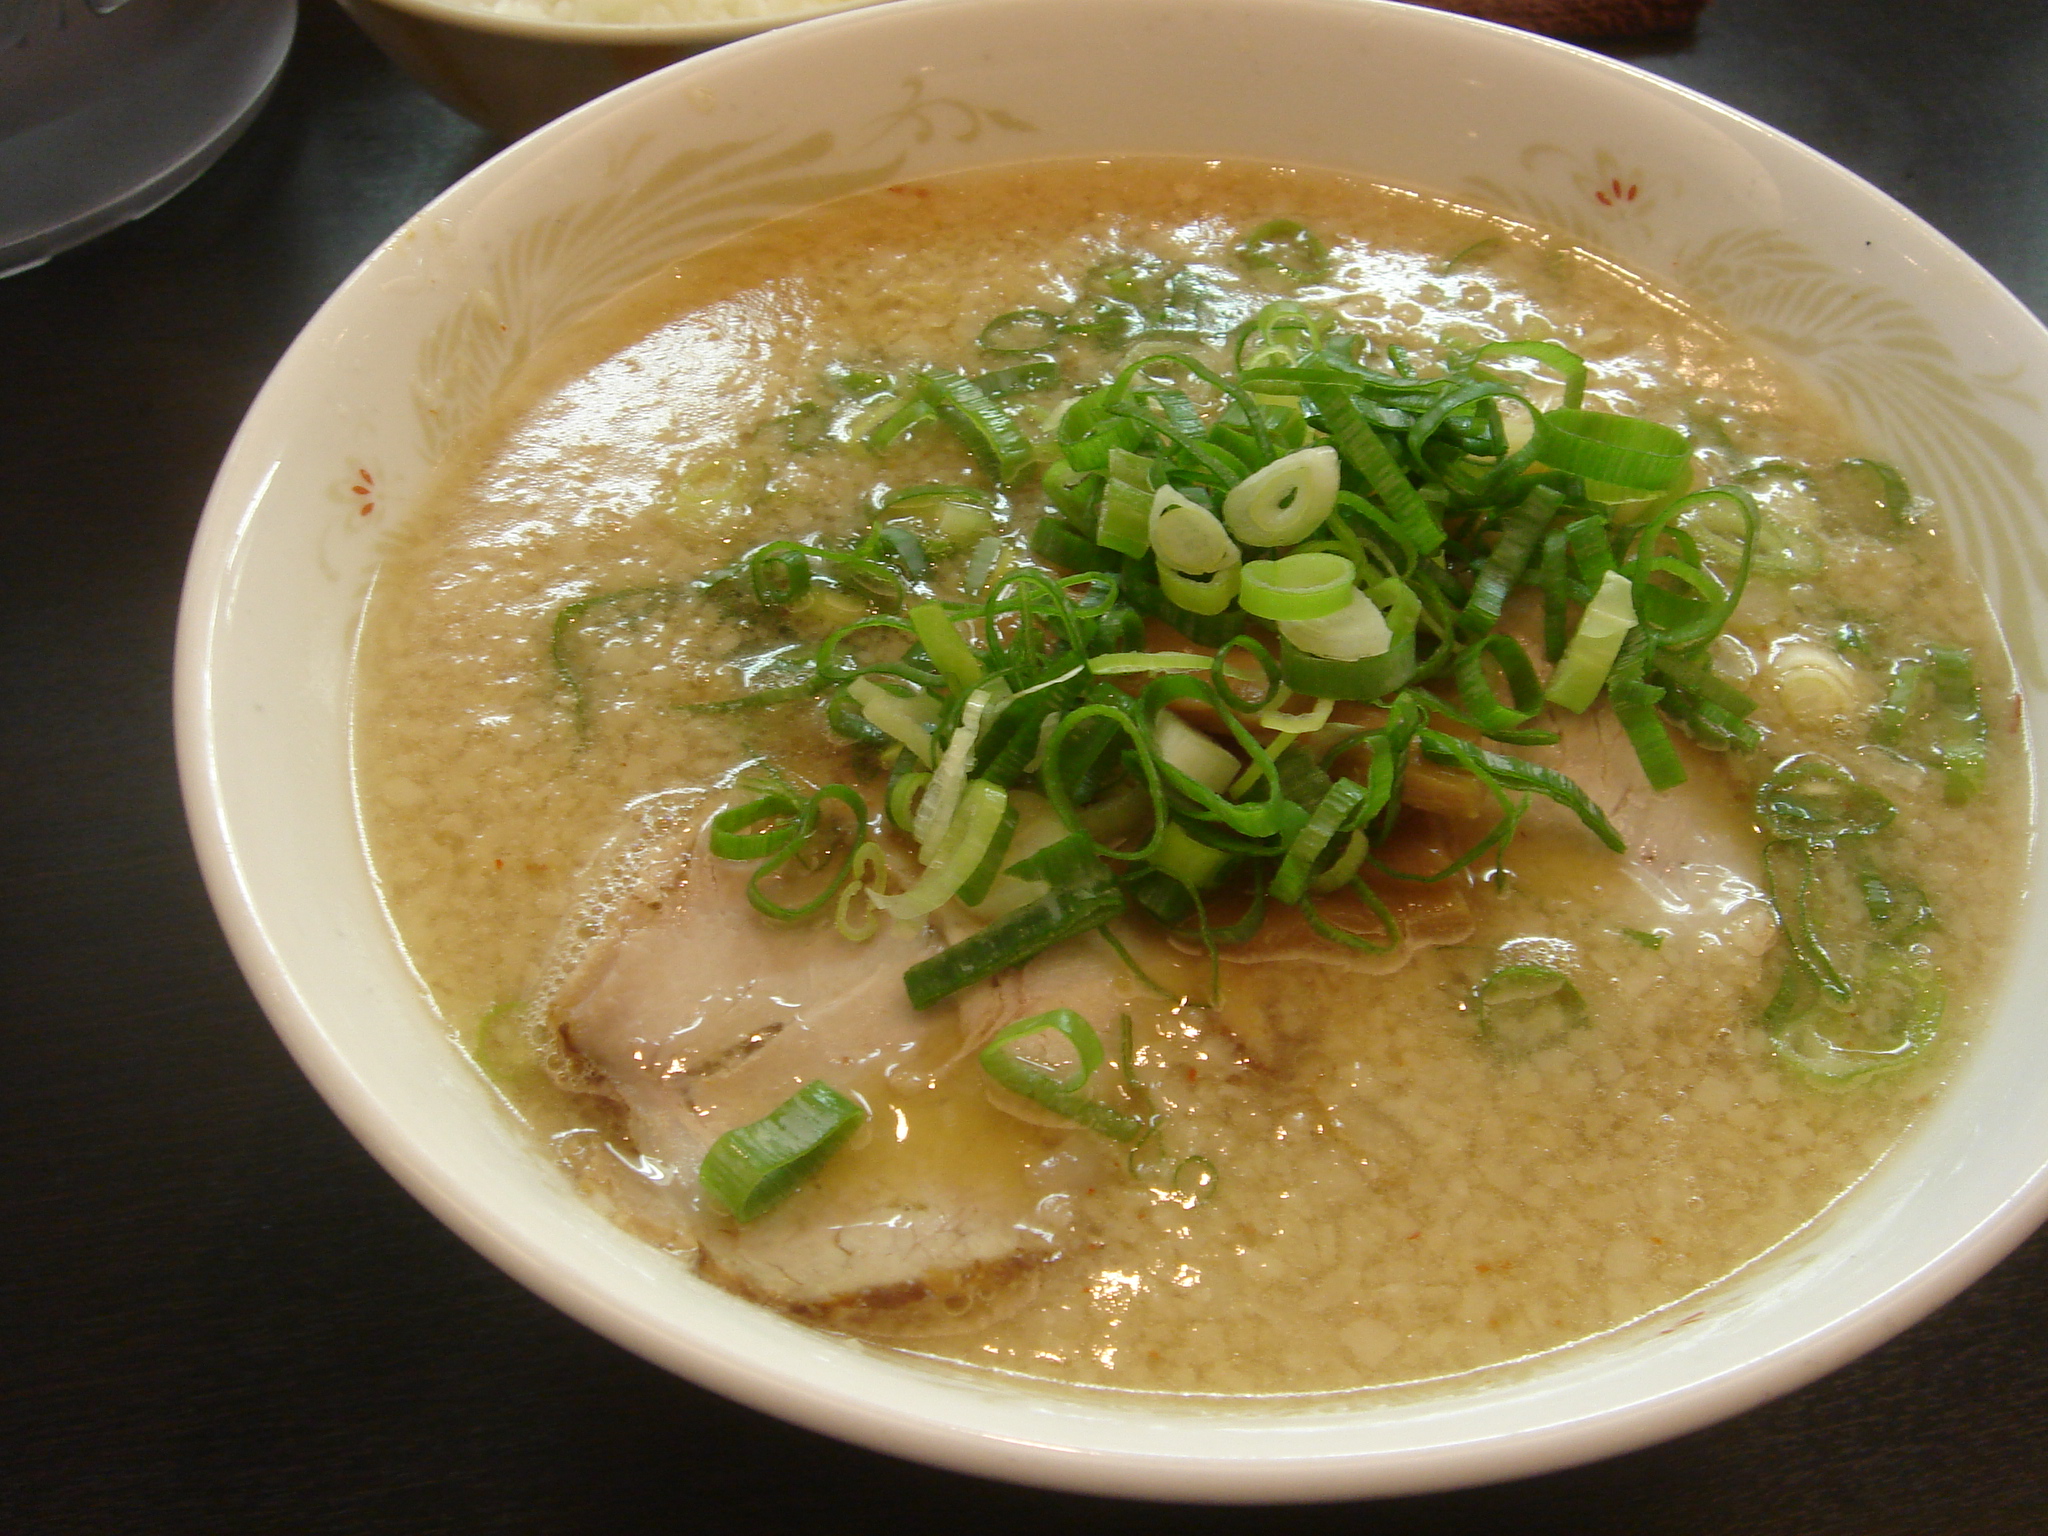 a bowl filled with green onions and soup